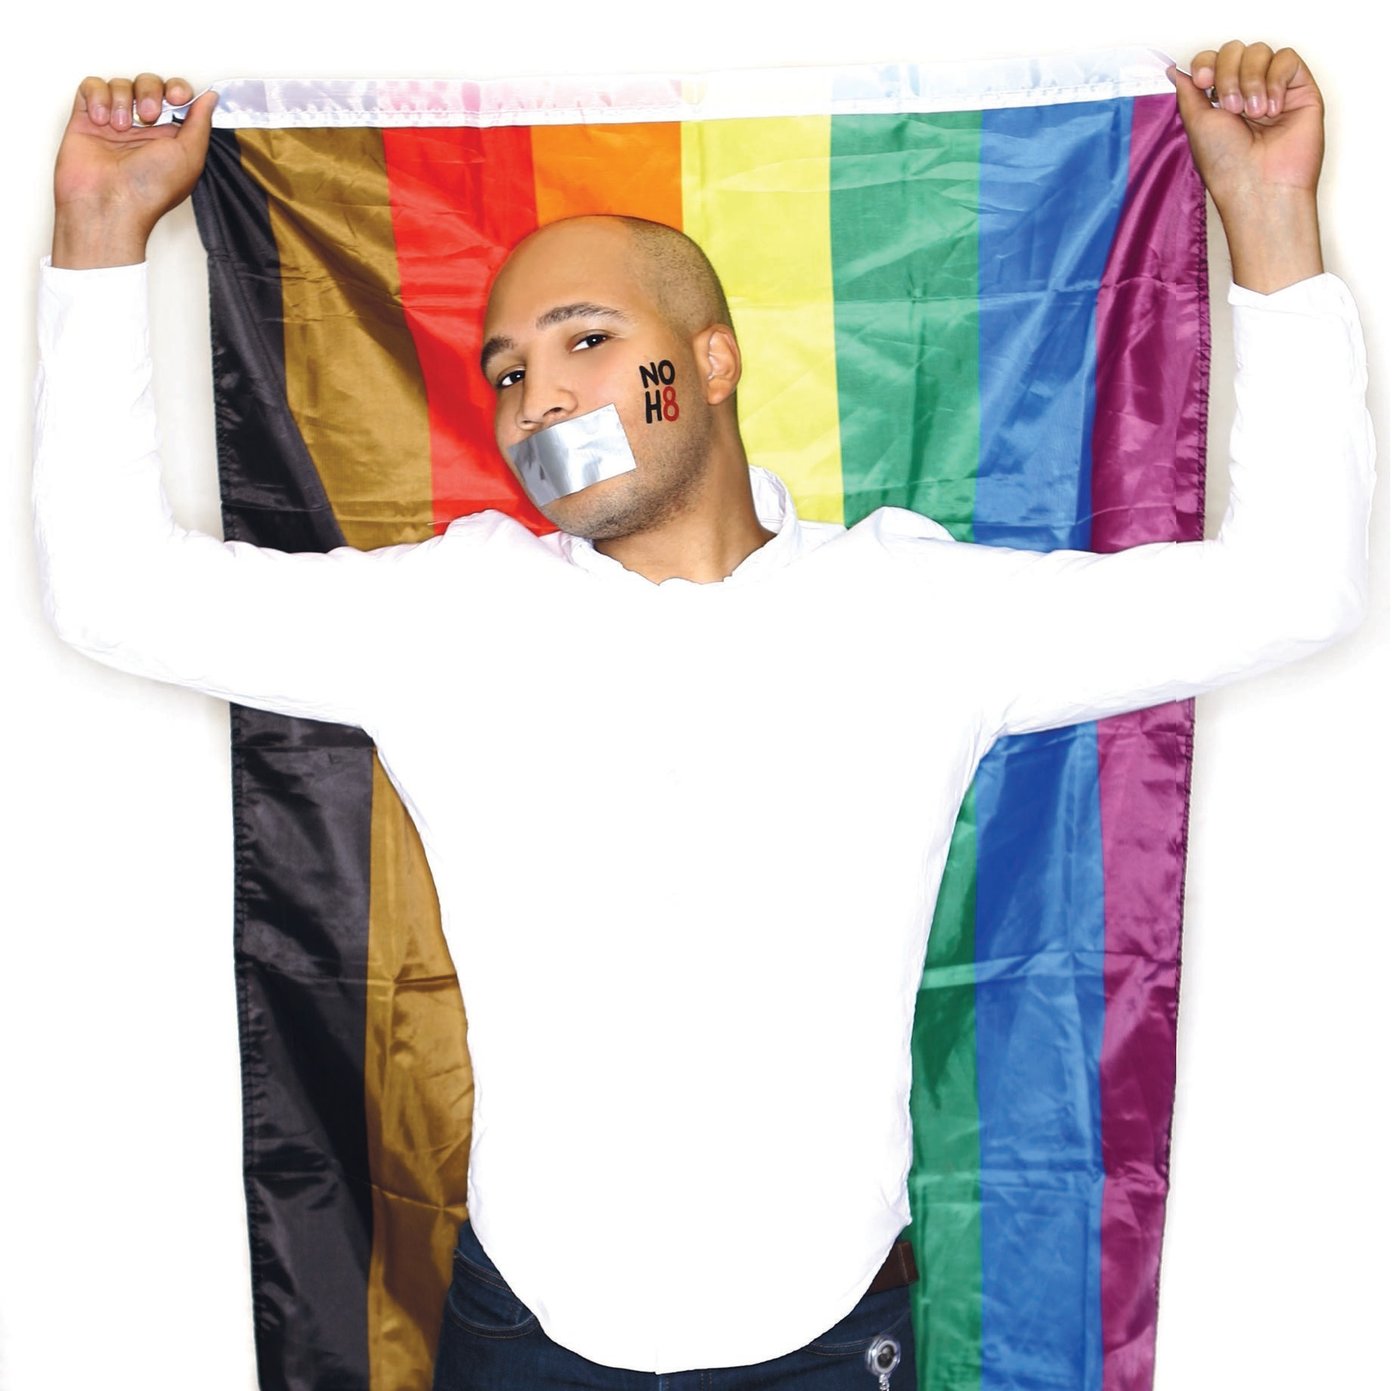 City of Atlanta Director of LGBTQ Affairs Malik Brown in a snap from the NOH8 Campaign